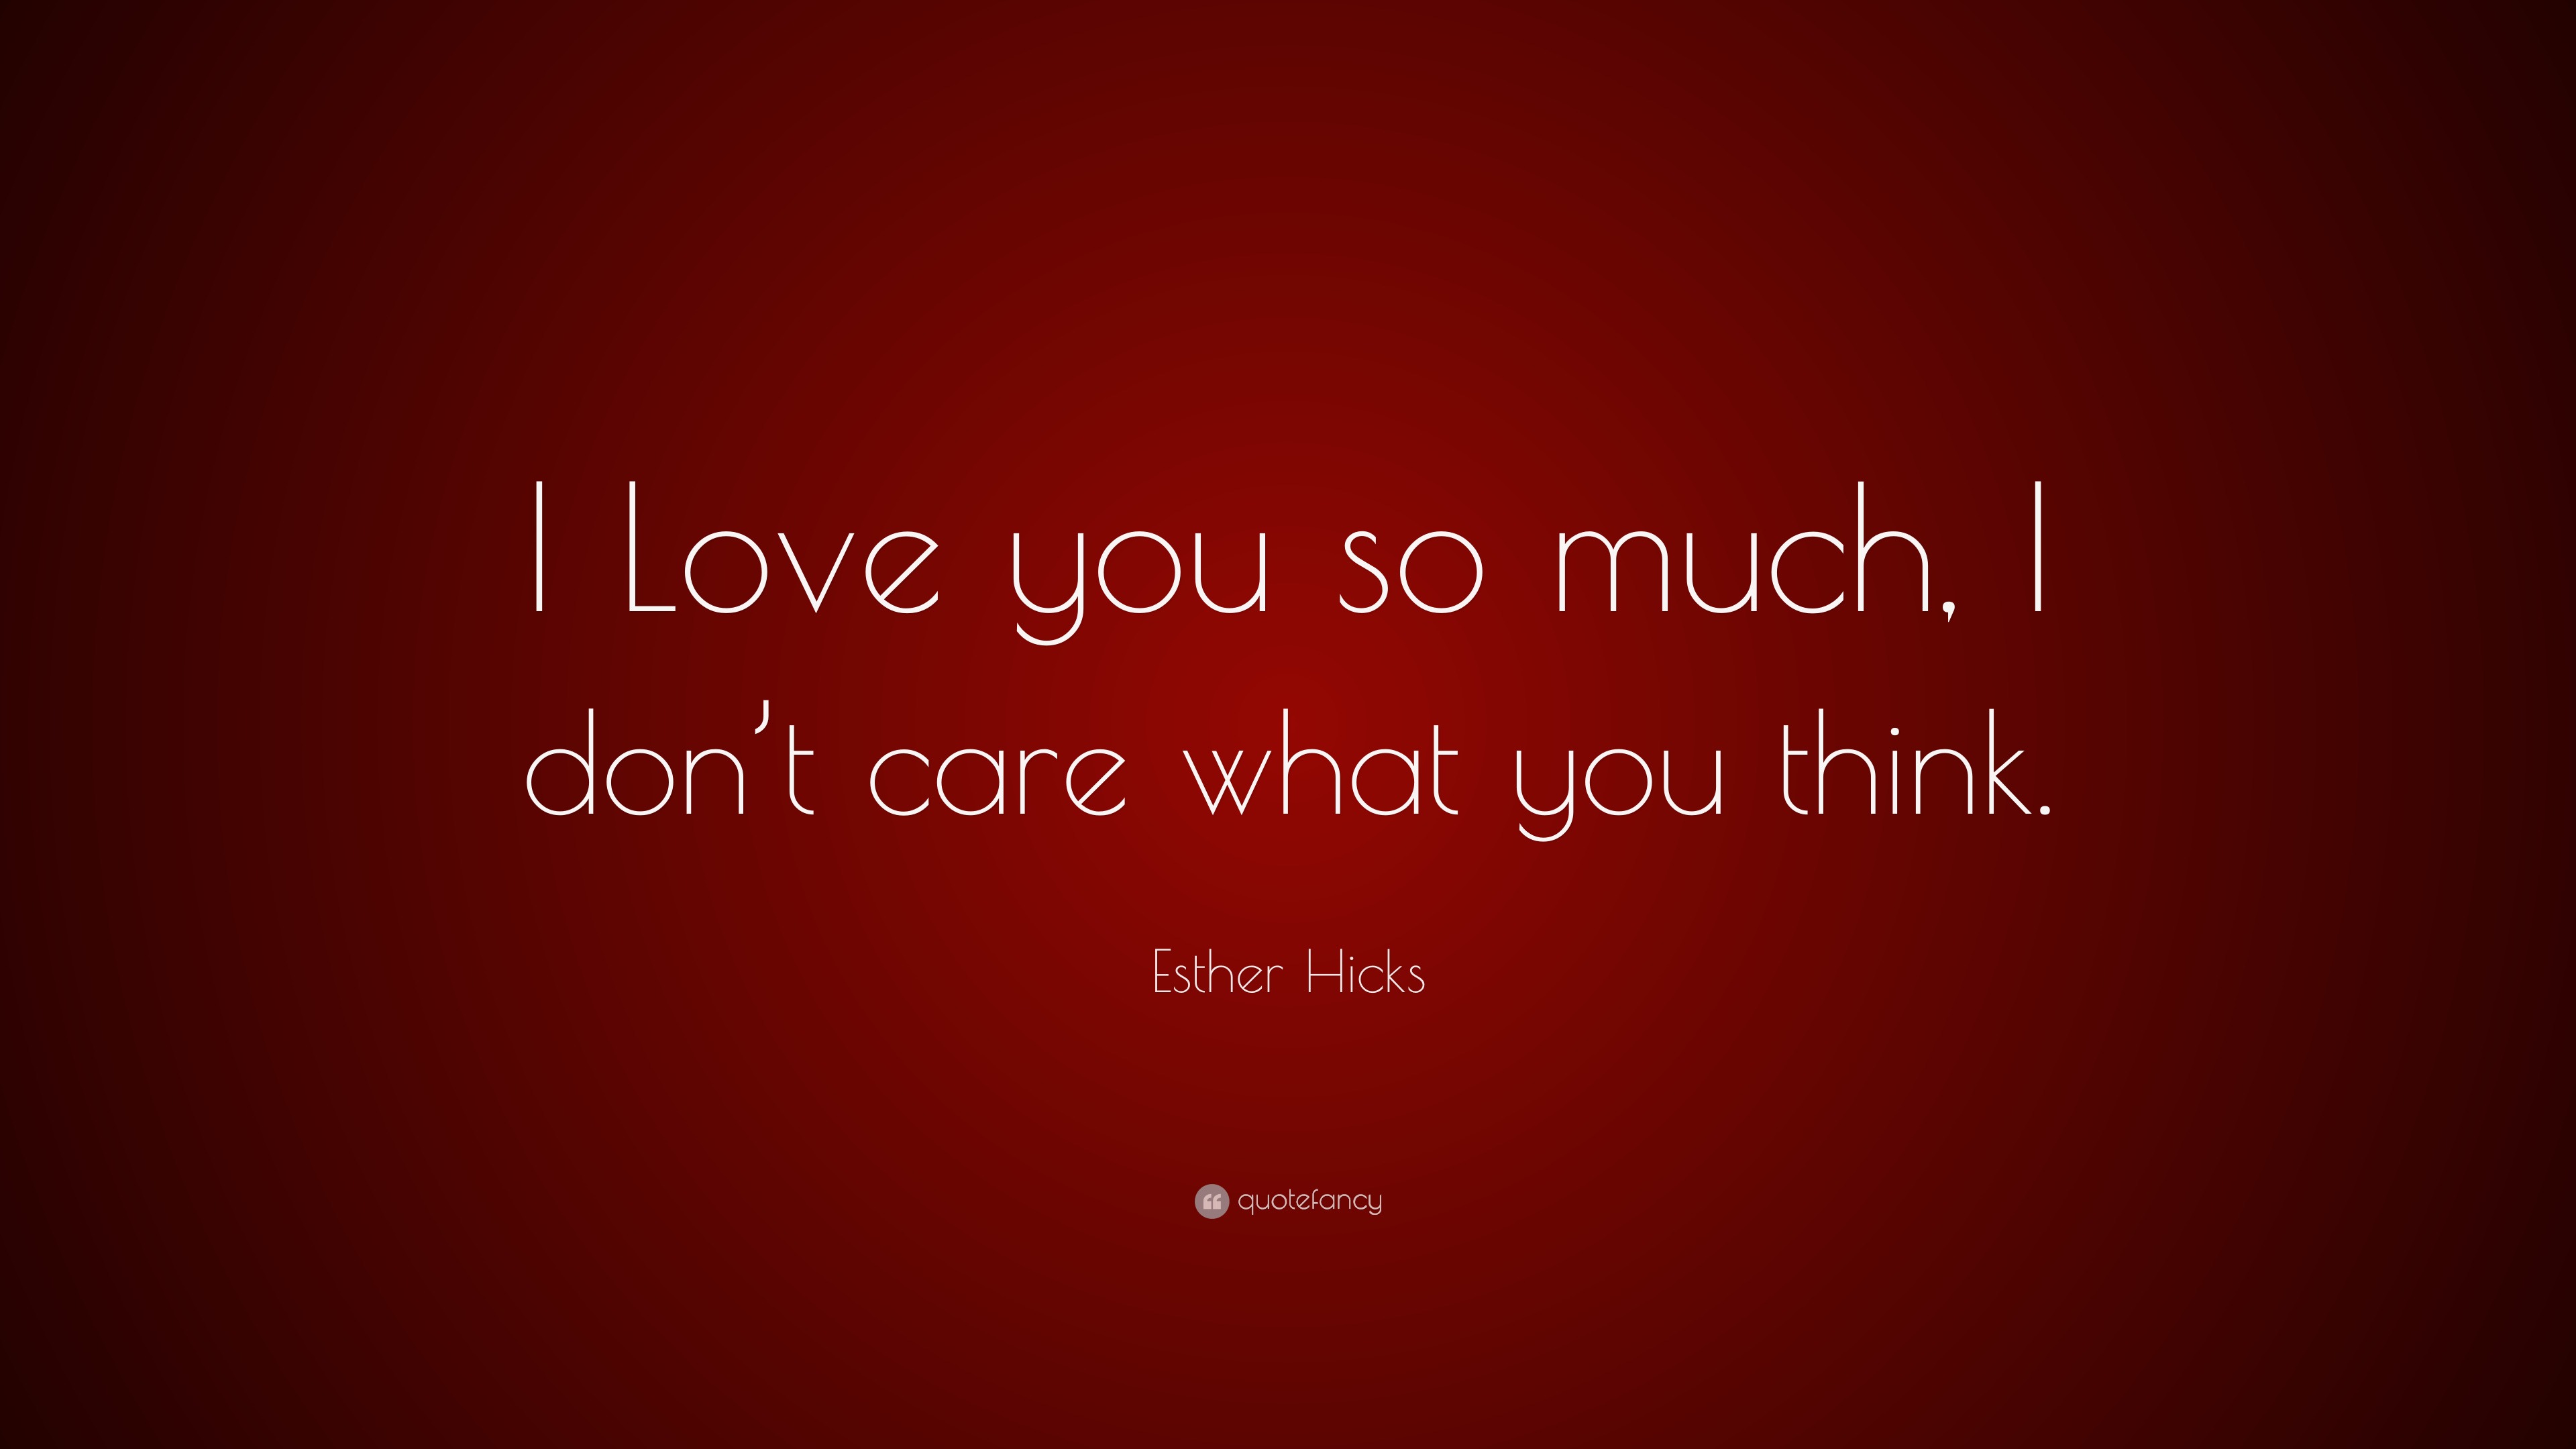 Esther Hicks Quote “I Love you so much I don t care